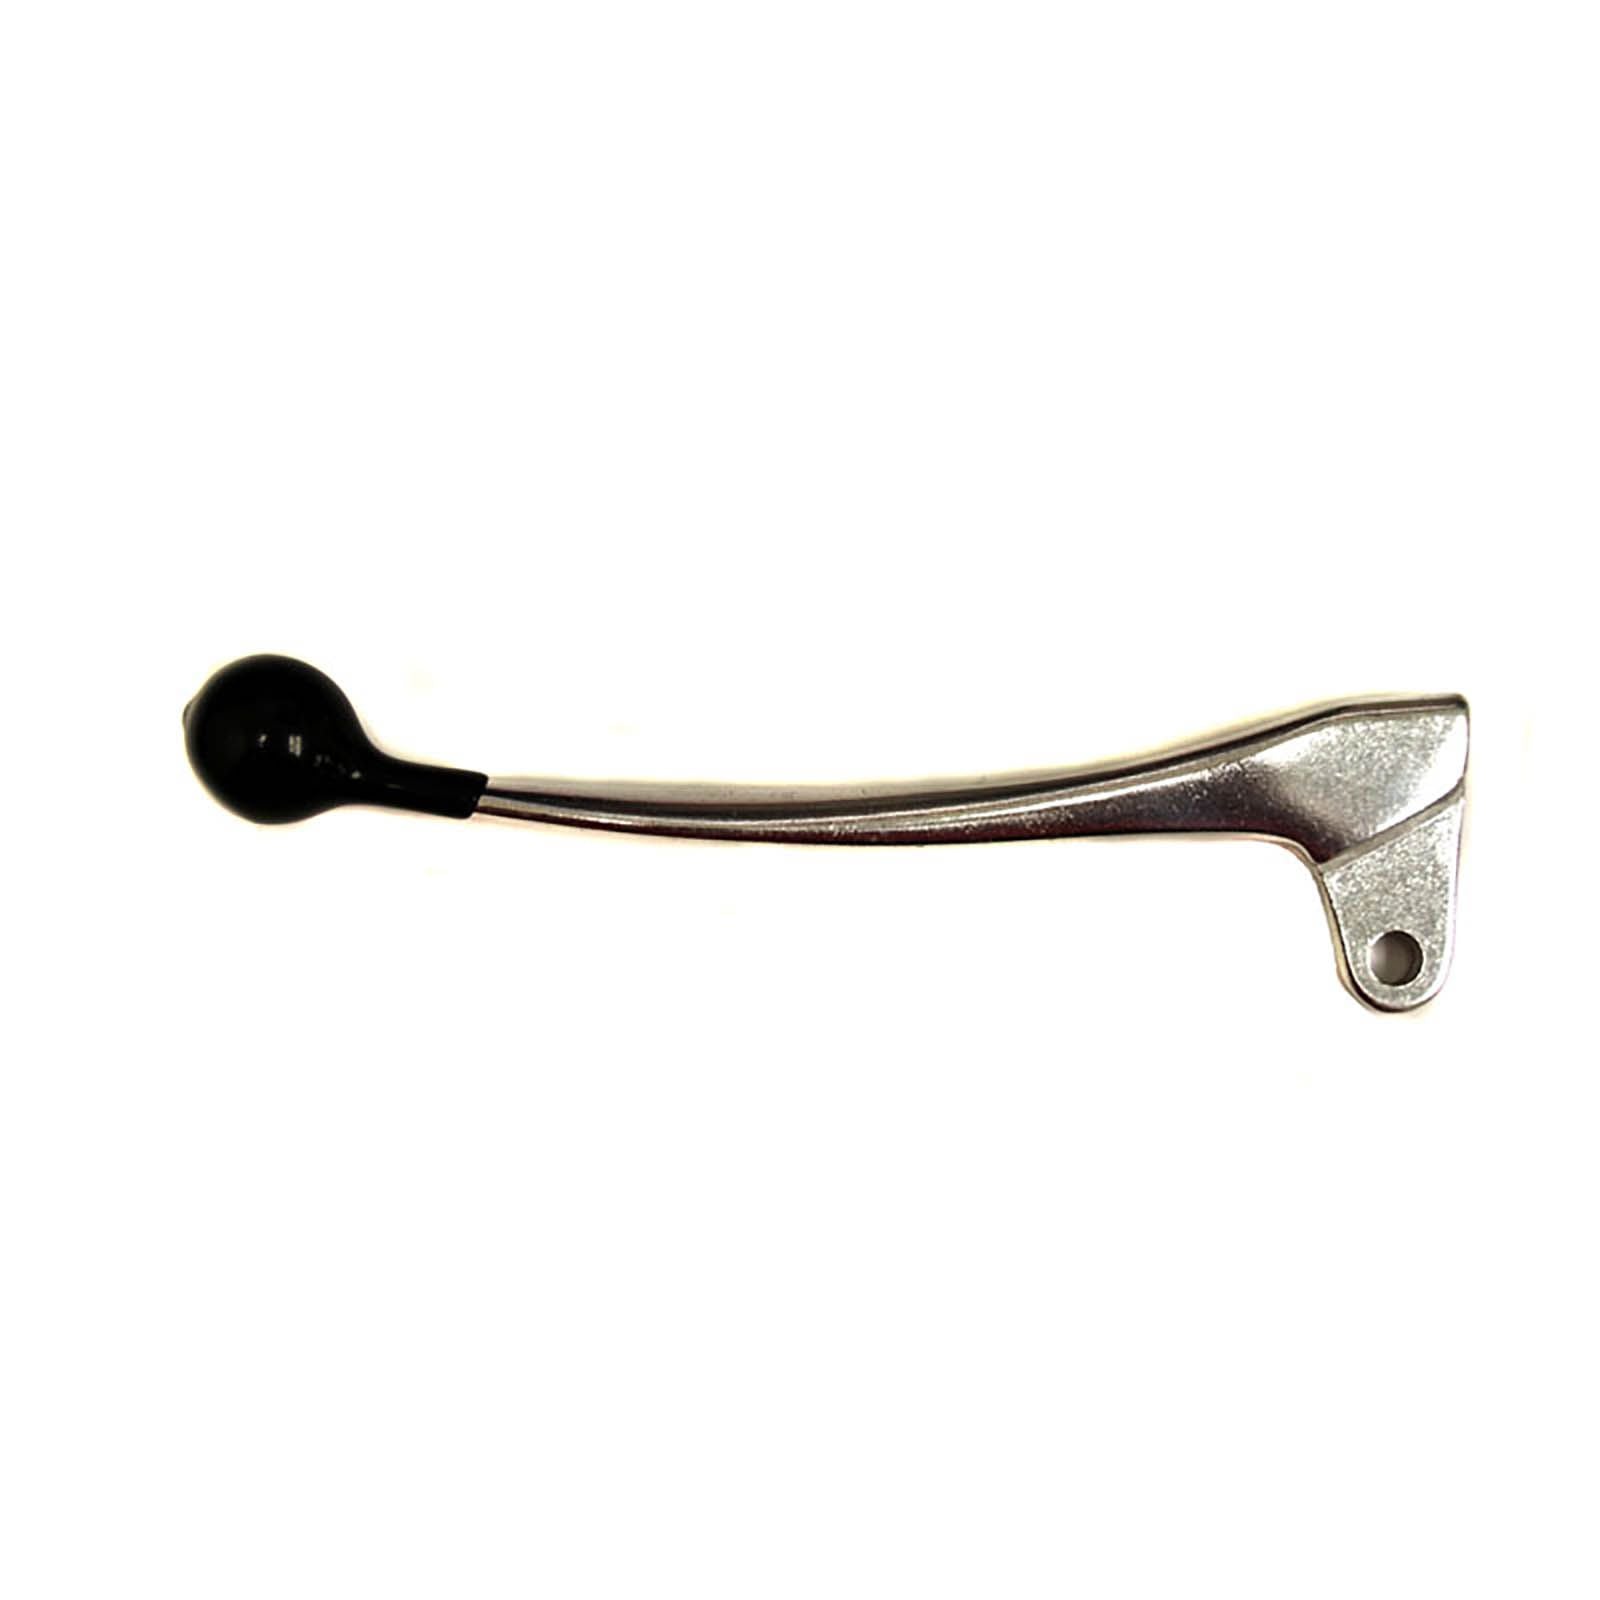 New WHITES Motorcycle Clutch Lever #L5C272